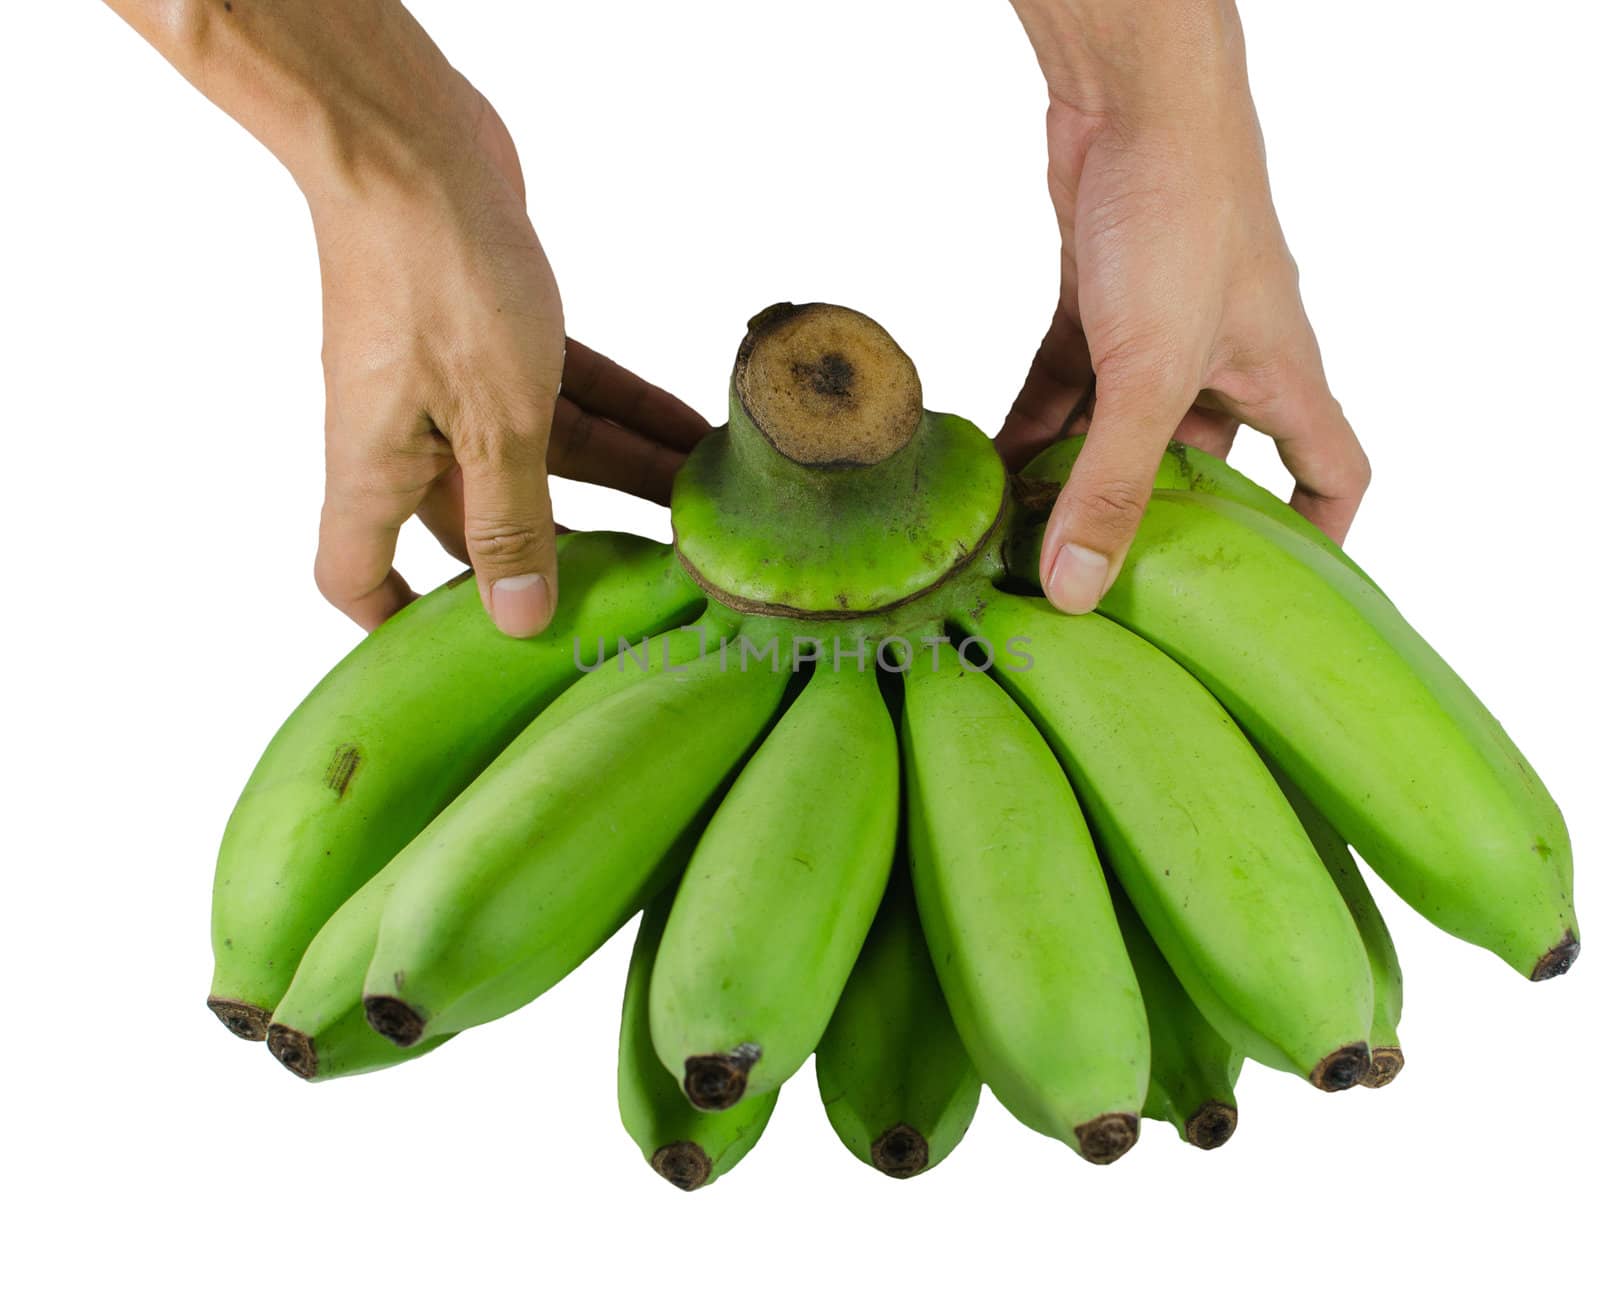 Green bananas do not ripe on a white background.